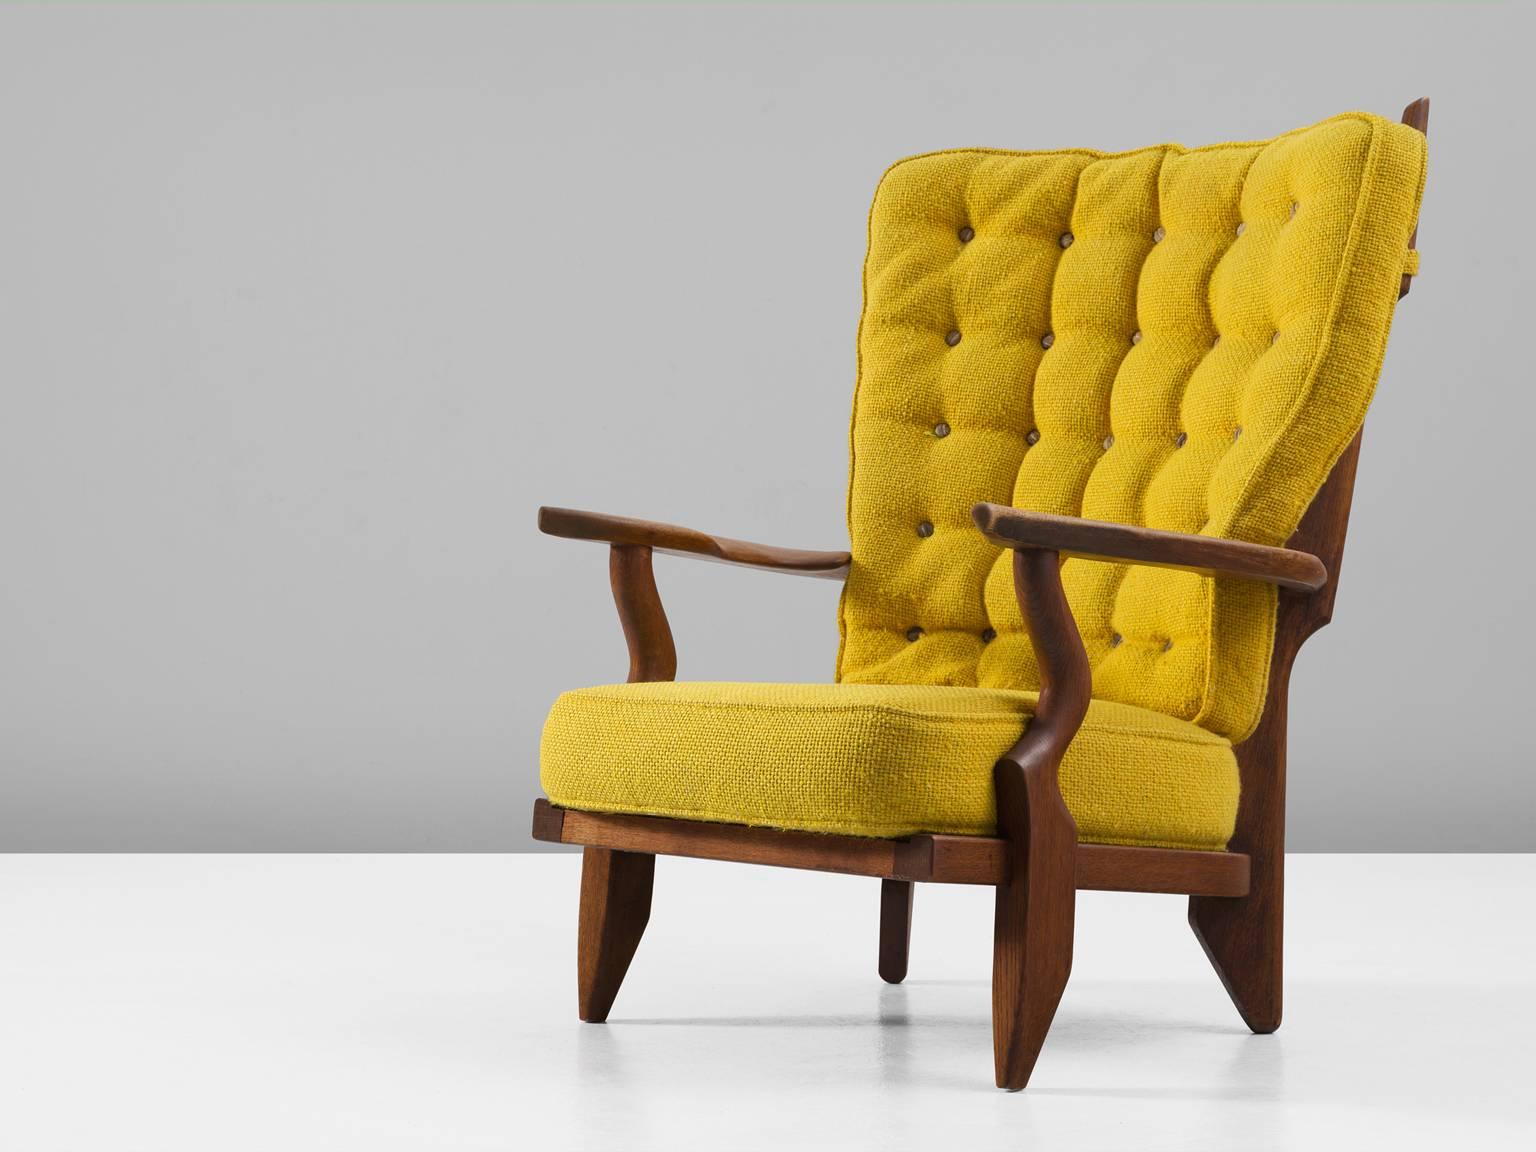 'Grand Repos' lounge chair in oak and fabric, by Guillerme et Chambron, France, 1960. 

High back lounge chair in solid oak with the typical characteristic decorative details at the back and capricious forms of the legs. Very comfortable, great